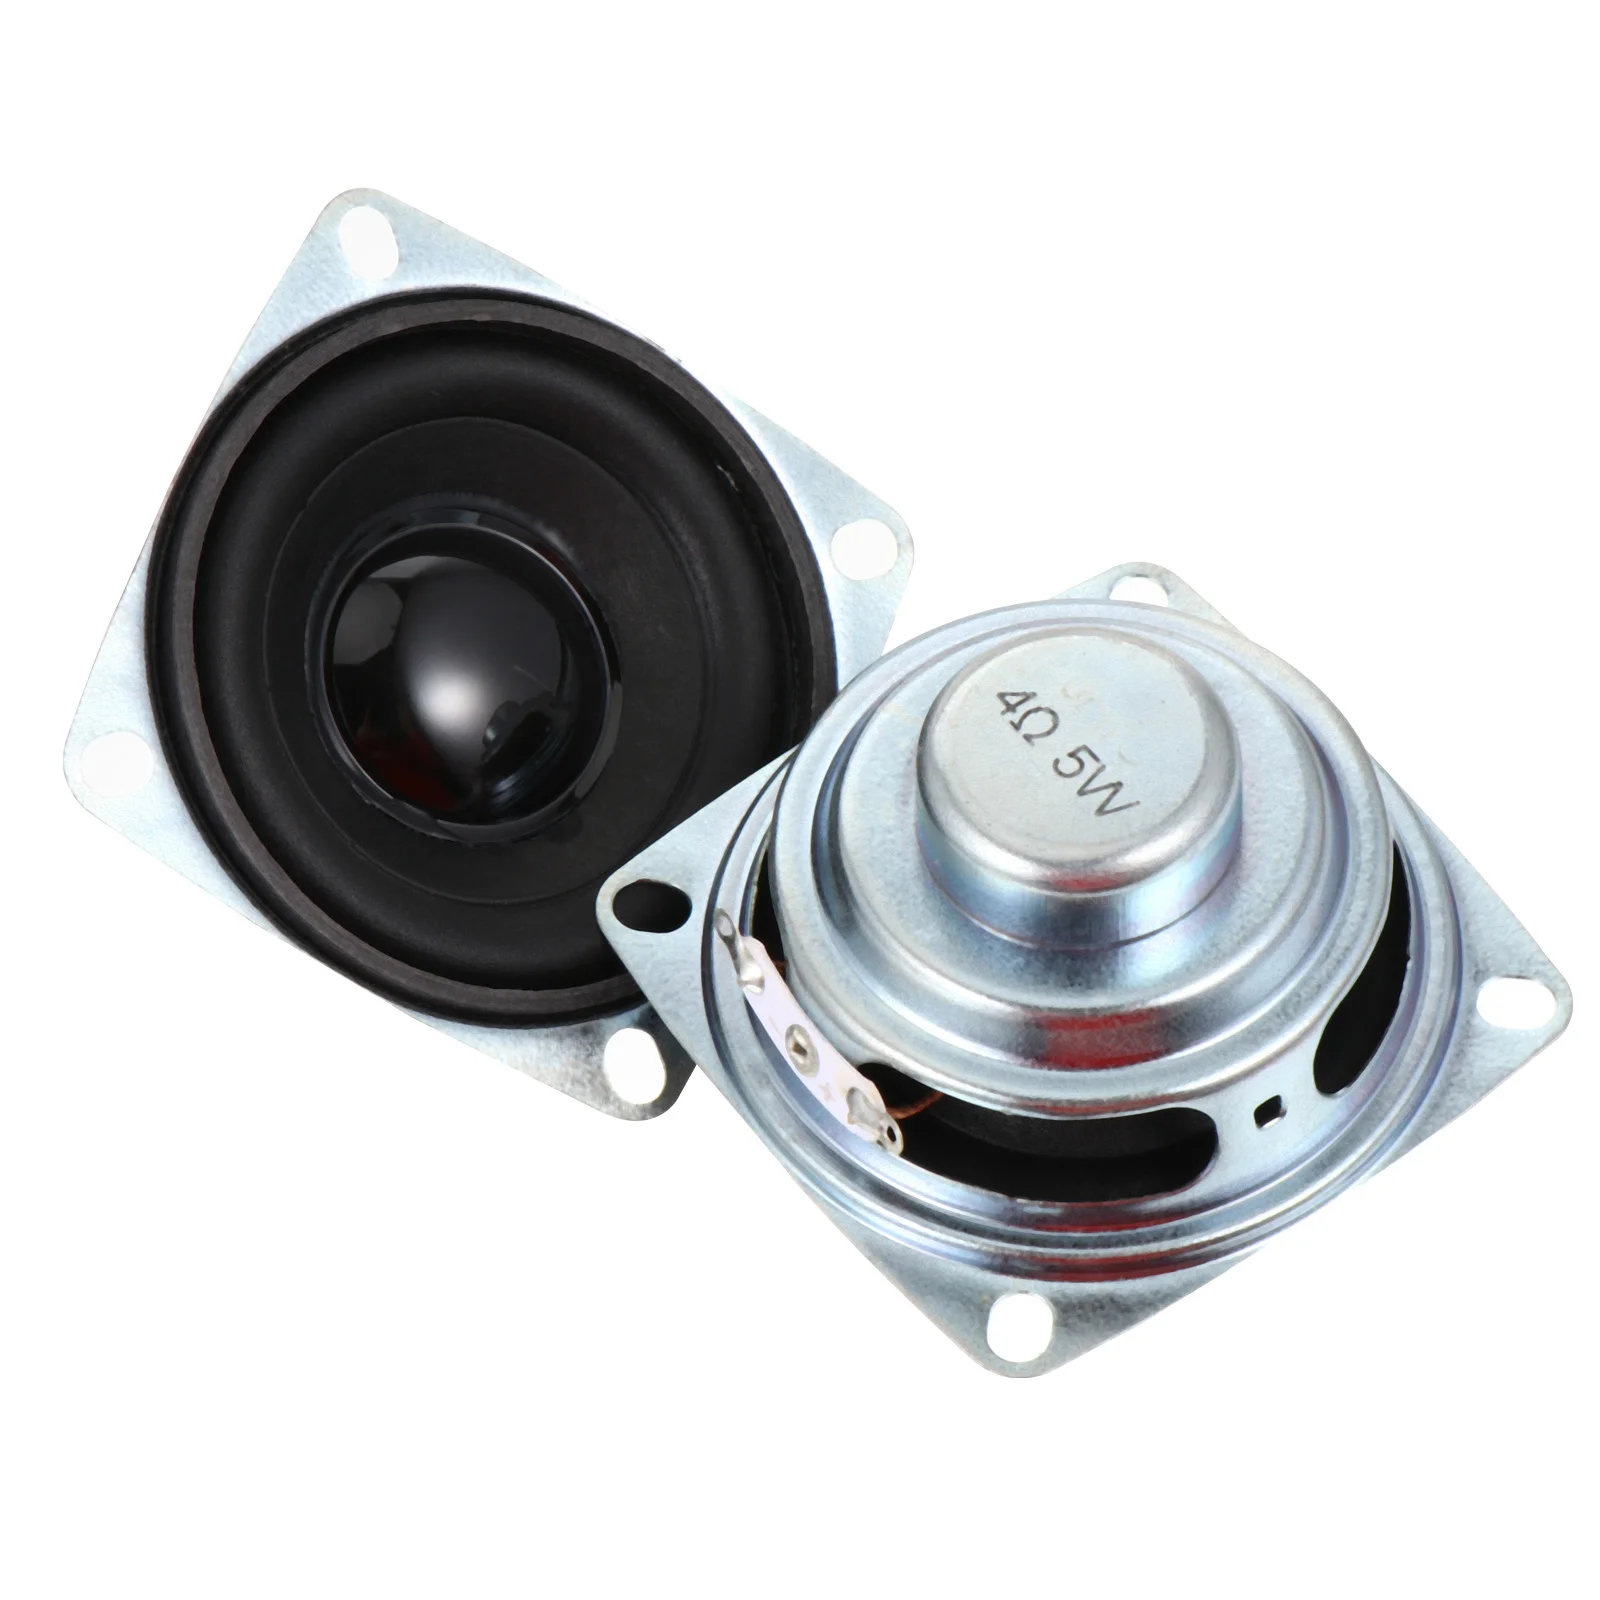 

Speaker Speakers Diy Loudspeaker Magnetic Audio Bass Mini Electronic Loud Subwoofer System Woofer Coaxial Round Mount Wall